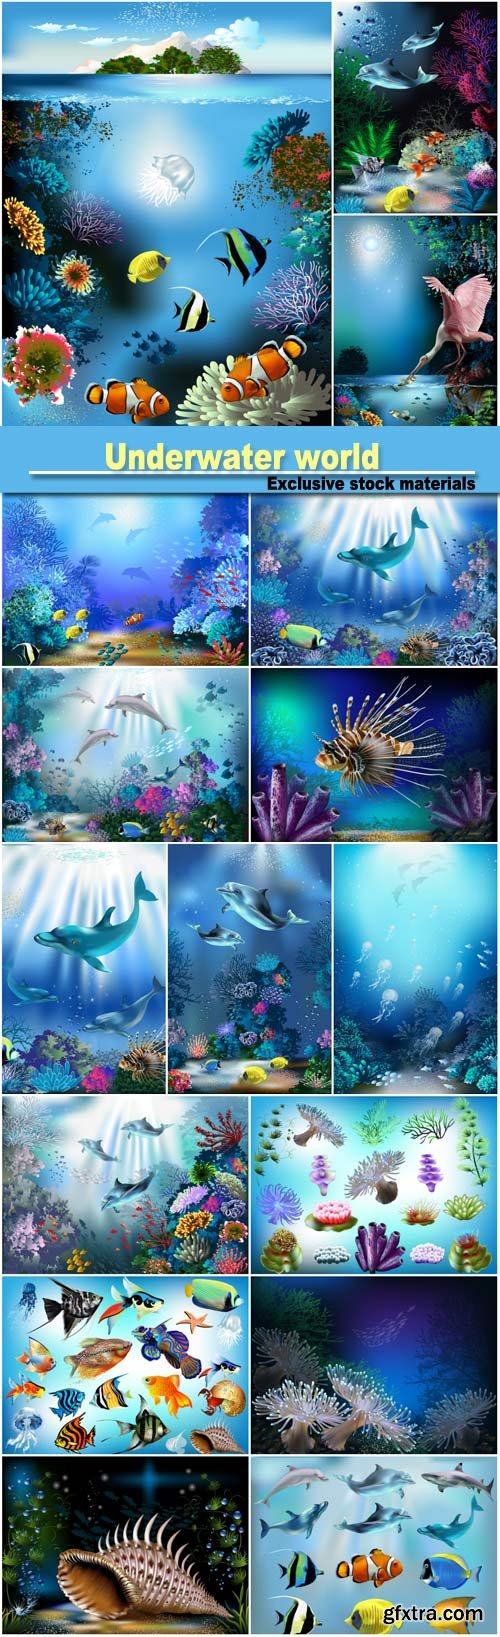 Underwater world, fish and dolphins